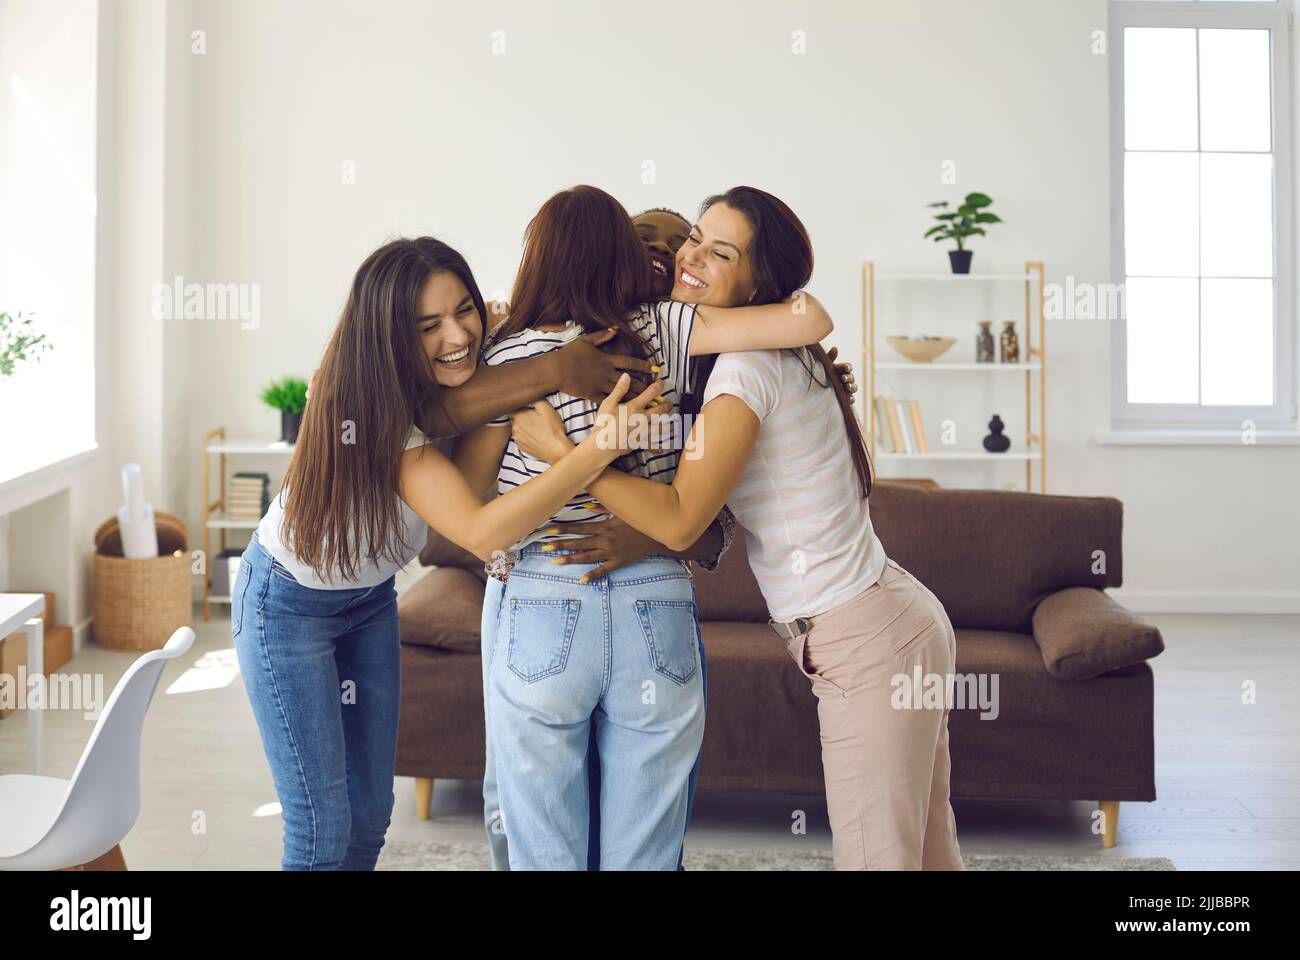 Group of happy young women hugging their friend and congratulating her on success Stock Photo